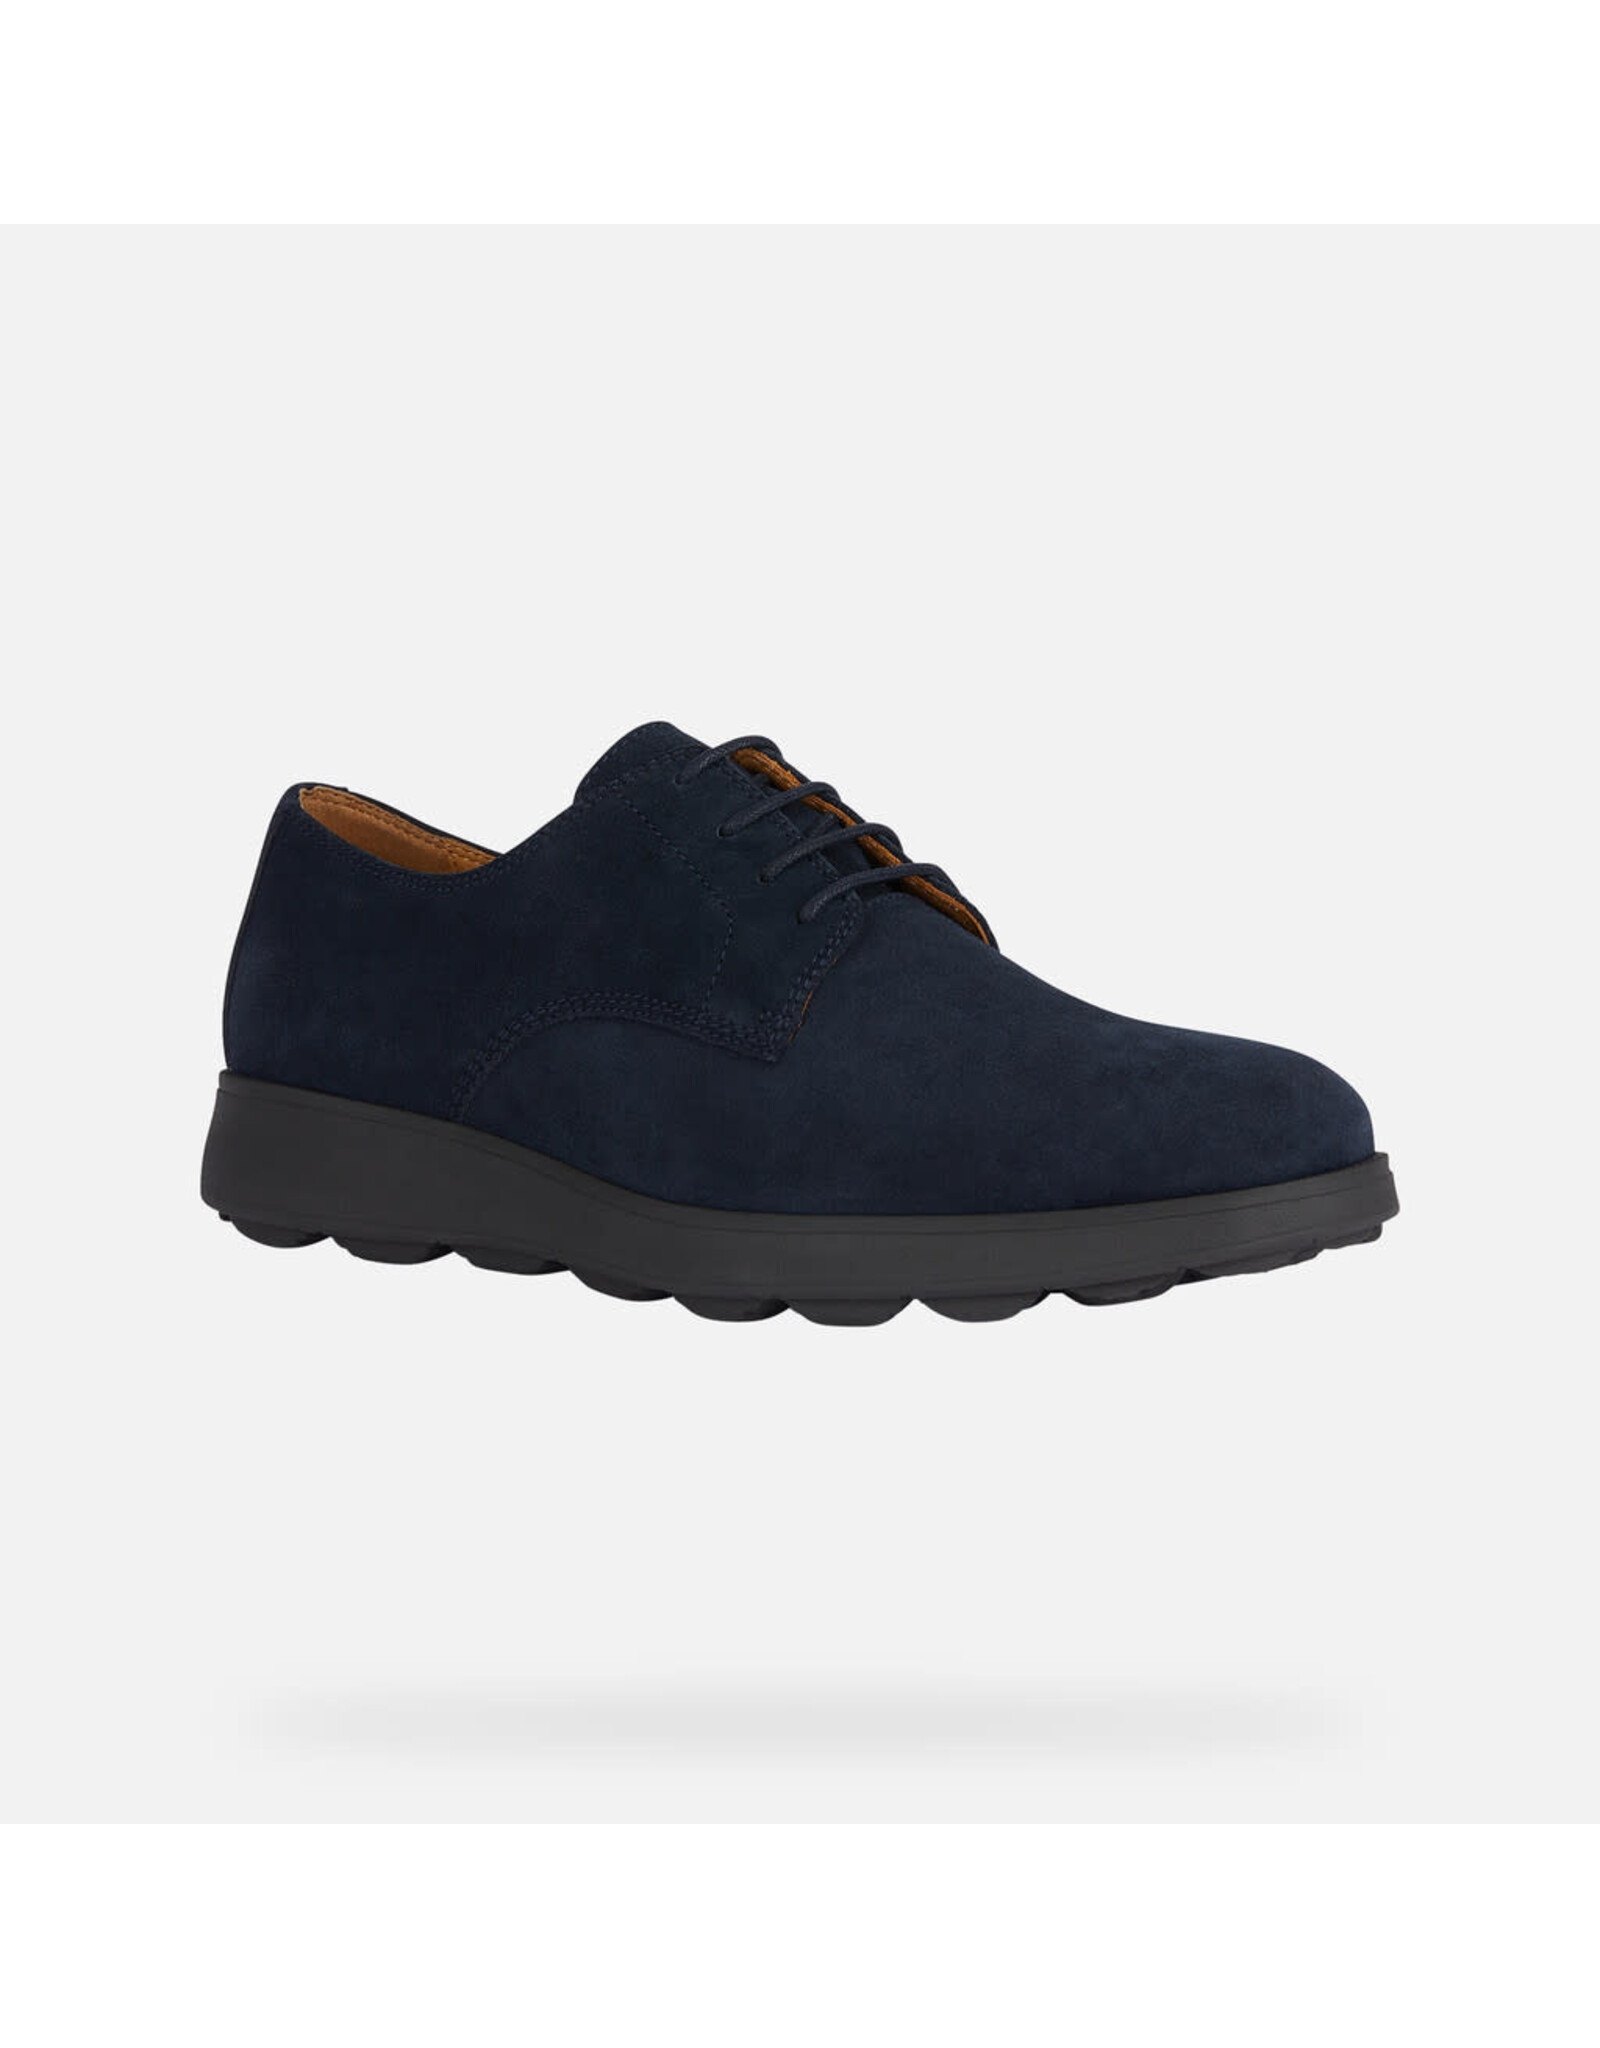 Geox Spherica Lace Up Shoe